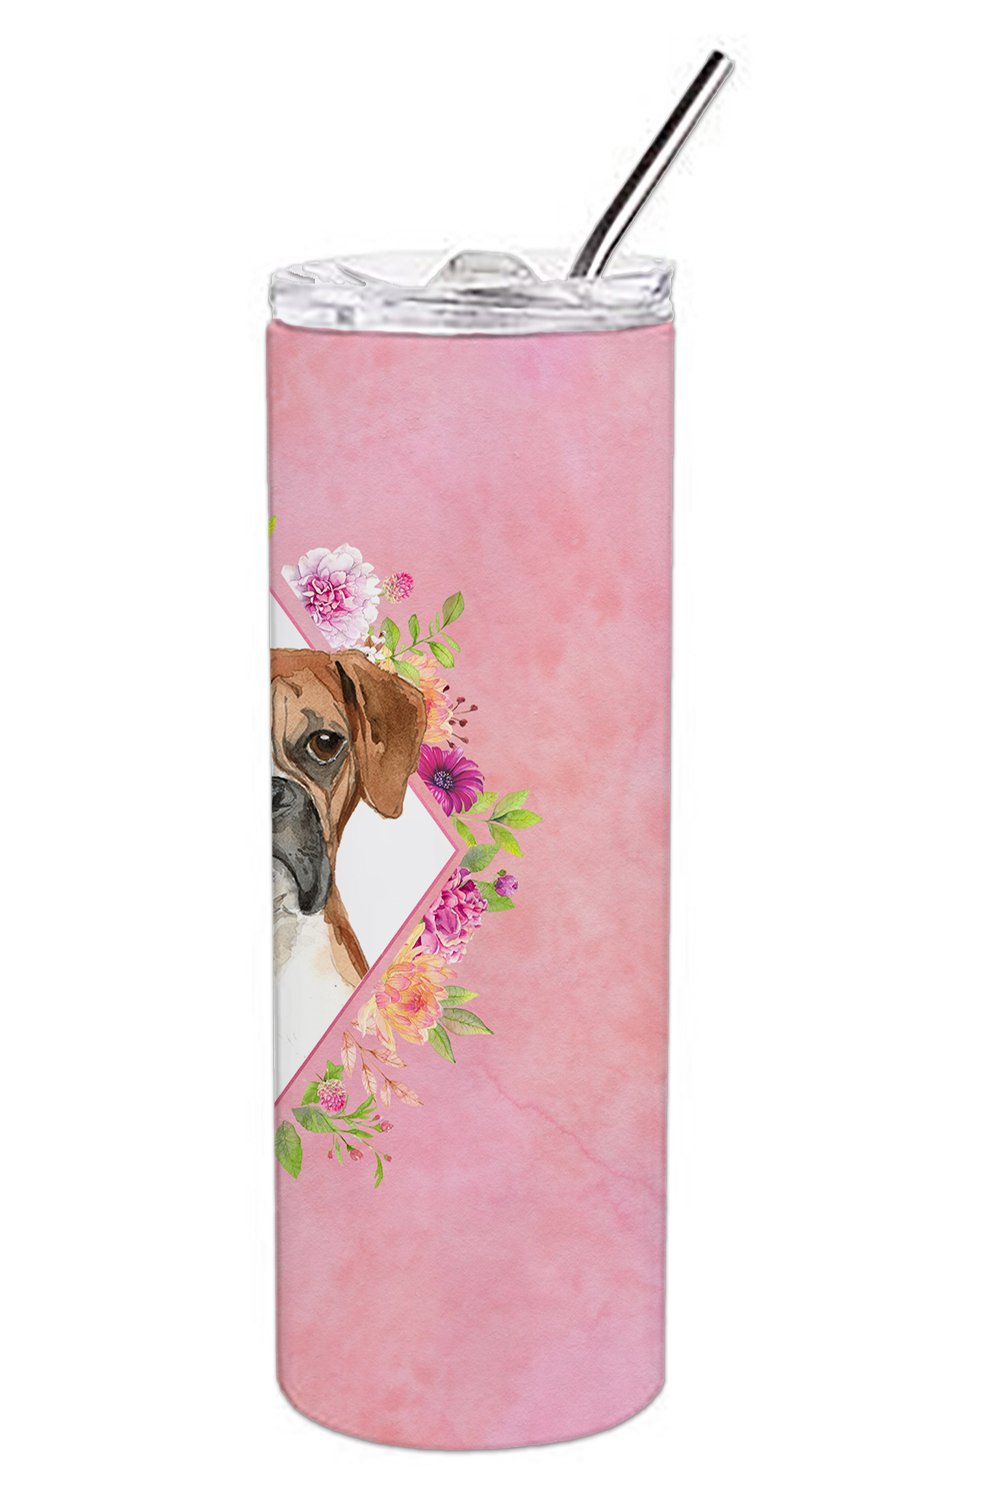 Boxer Pink Flowers Double Walled Stainless Steel 20 oz Skinny Tumbler CK4255TBL20 by Caroline's Treasures